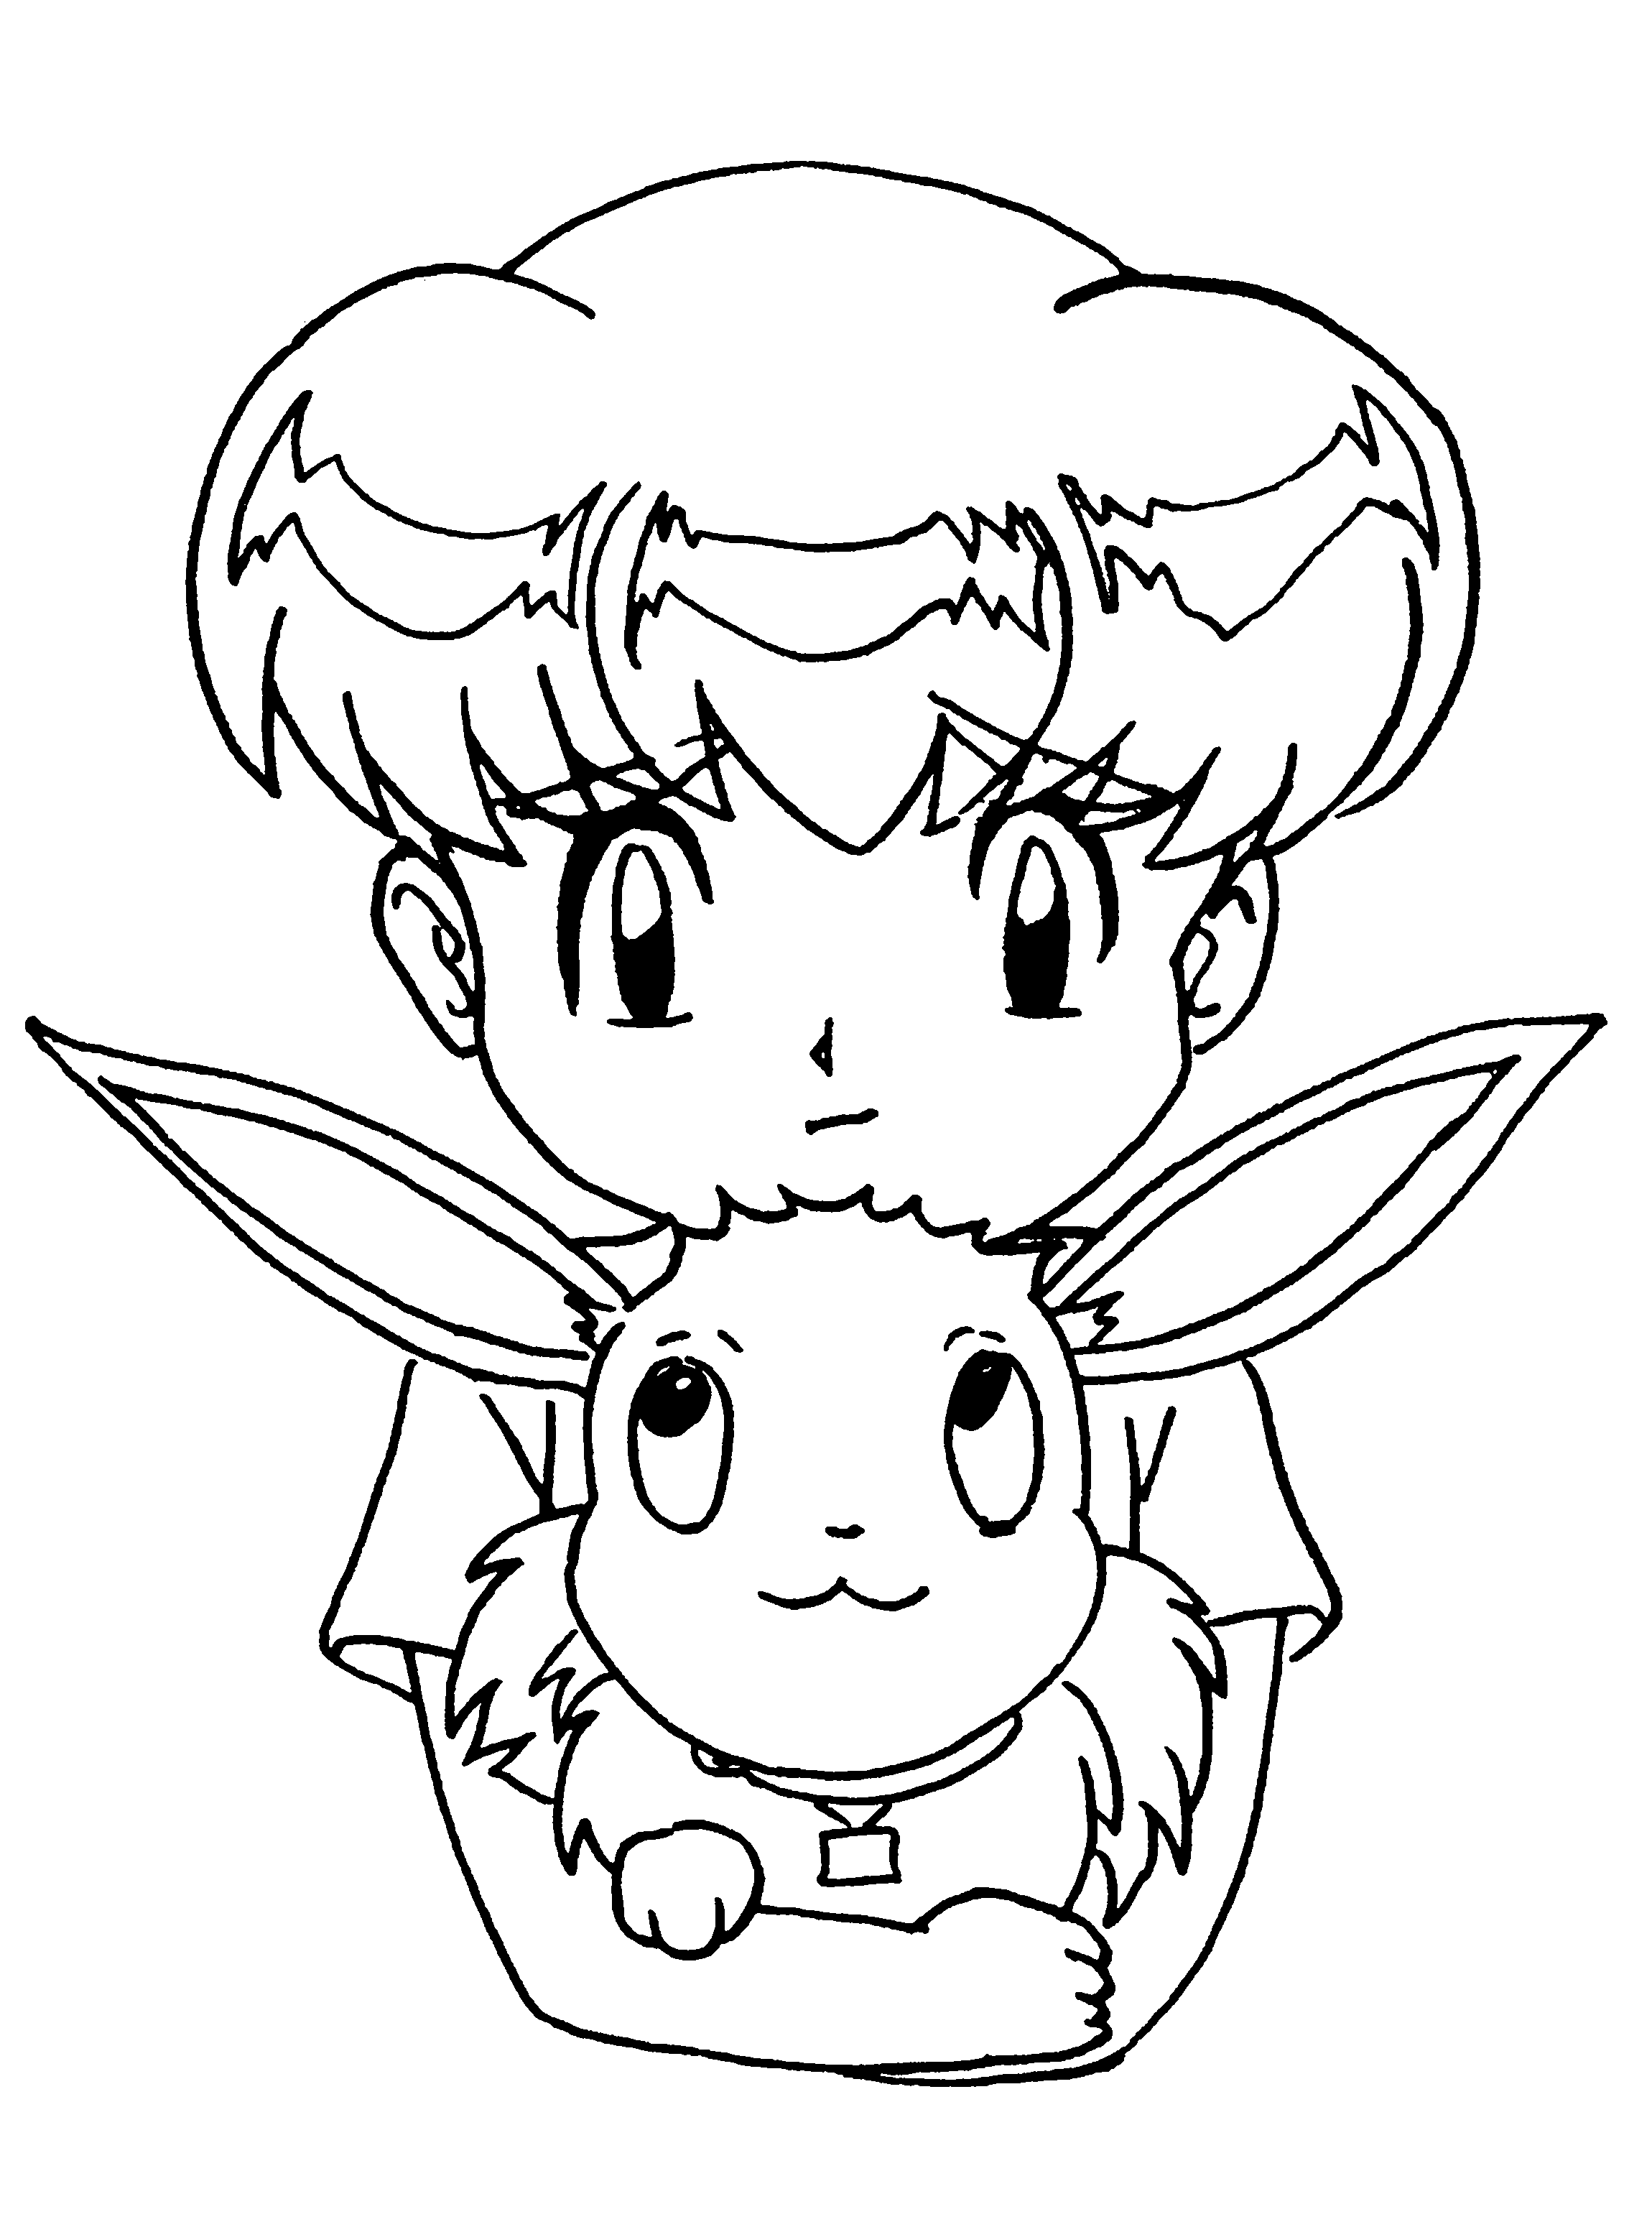 animated-coloring-pages-pokemon-image-0554